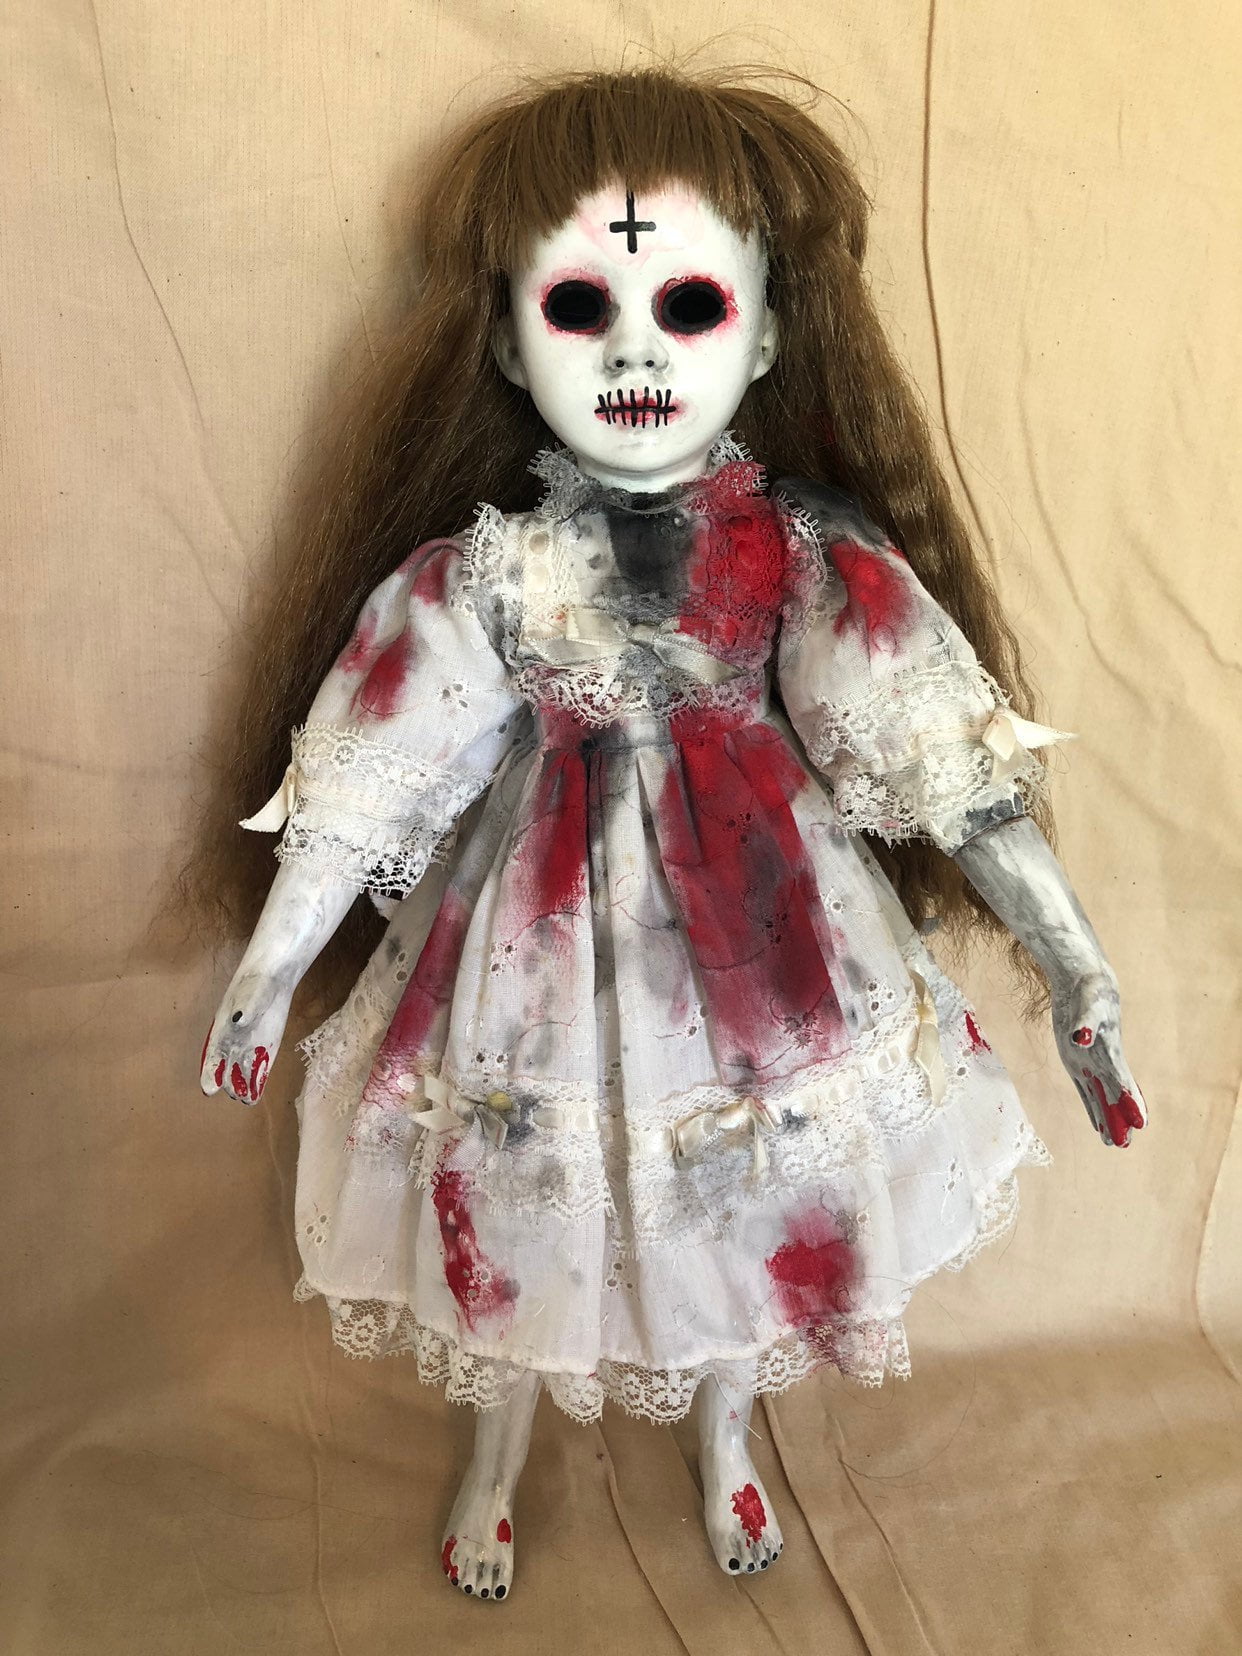 OOAK Bloody Zombie Girl Gothic Creepy Horror Doll Art by Christie